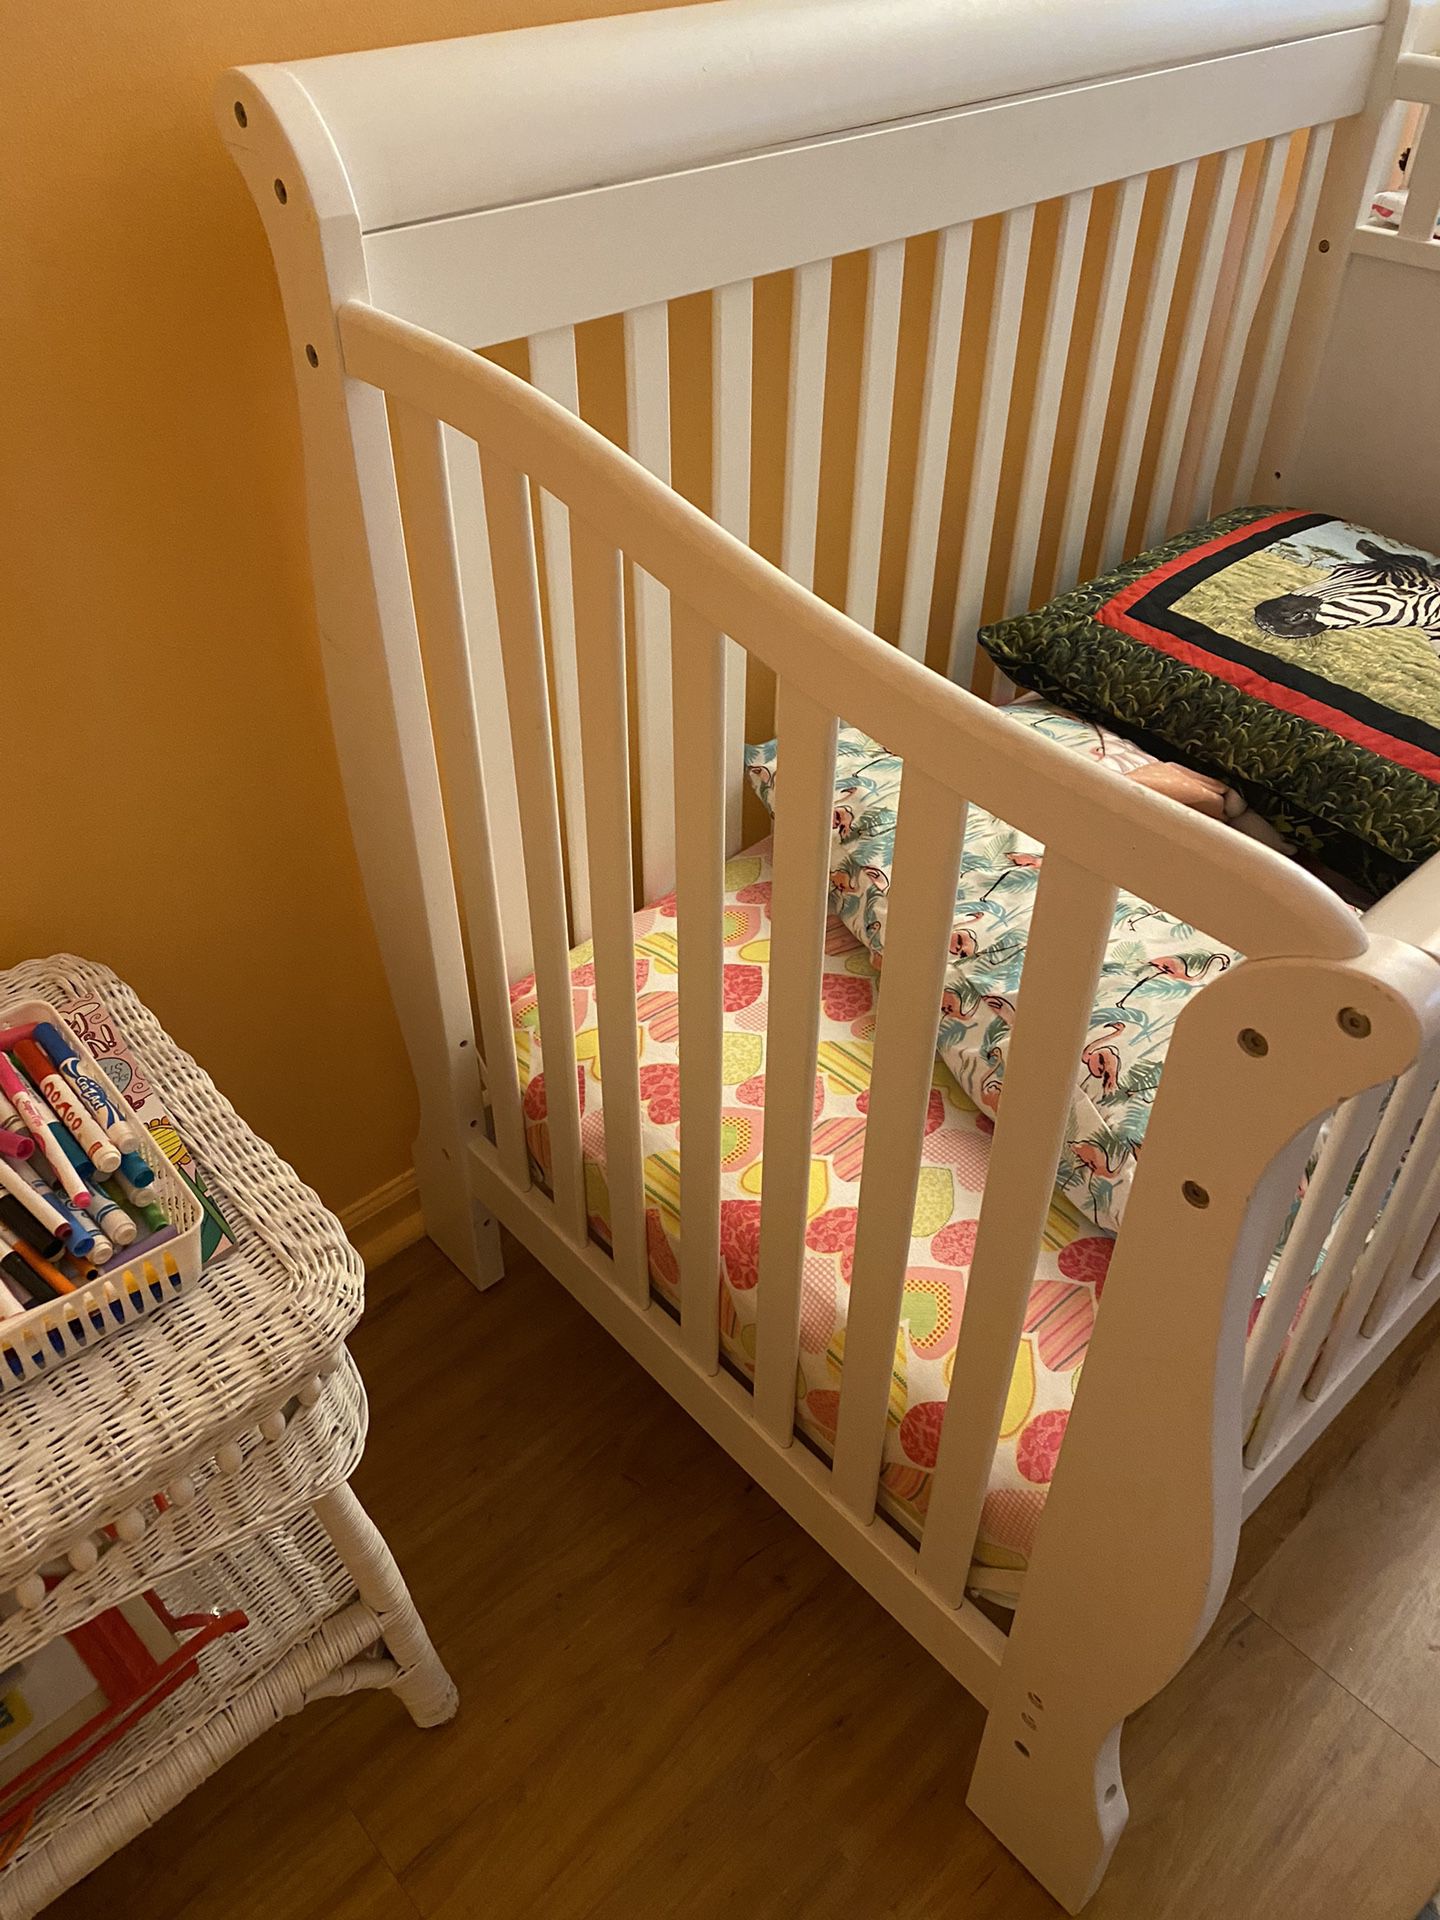 Crib With Changing Table And Mattress